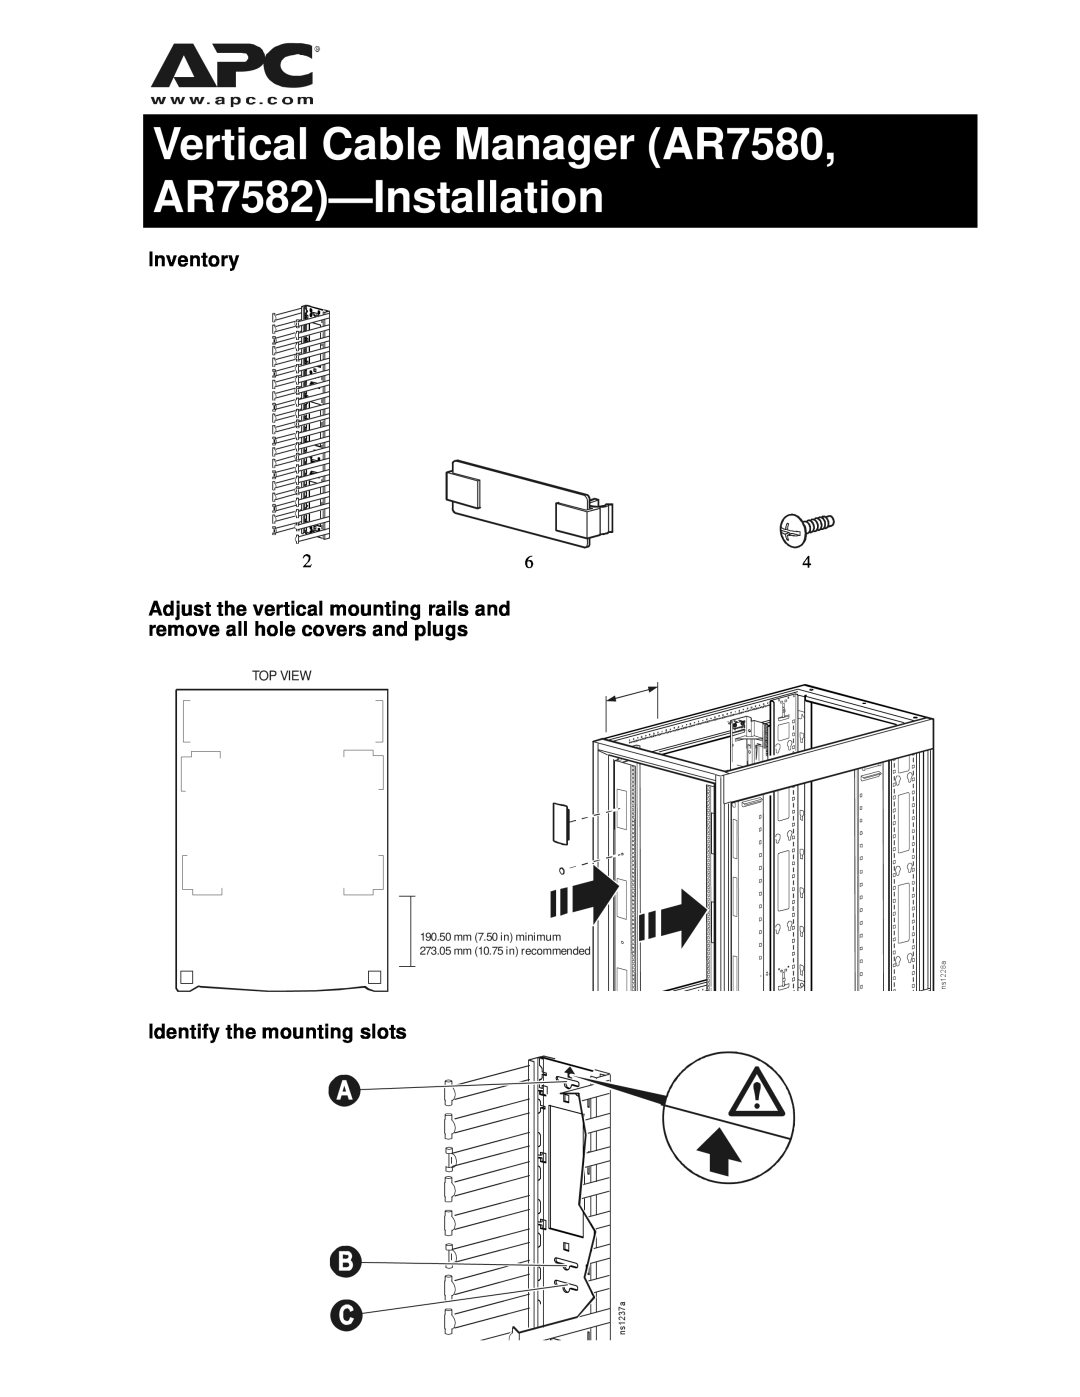 APC manual Inventory, Identify the mounting slots, ns1237a, Vertical Cable Manager AR7580, AR7582-Installation, ns1228a 